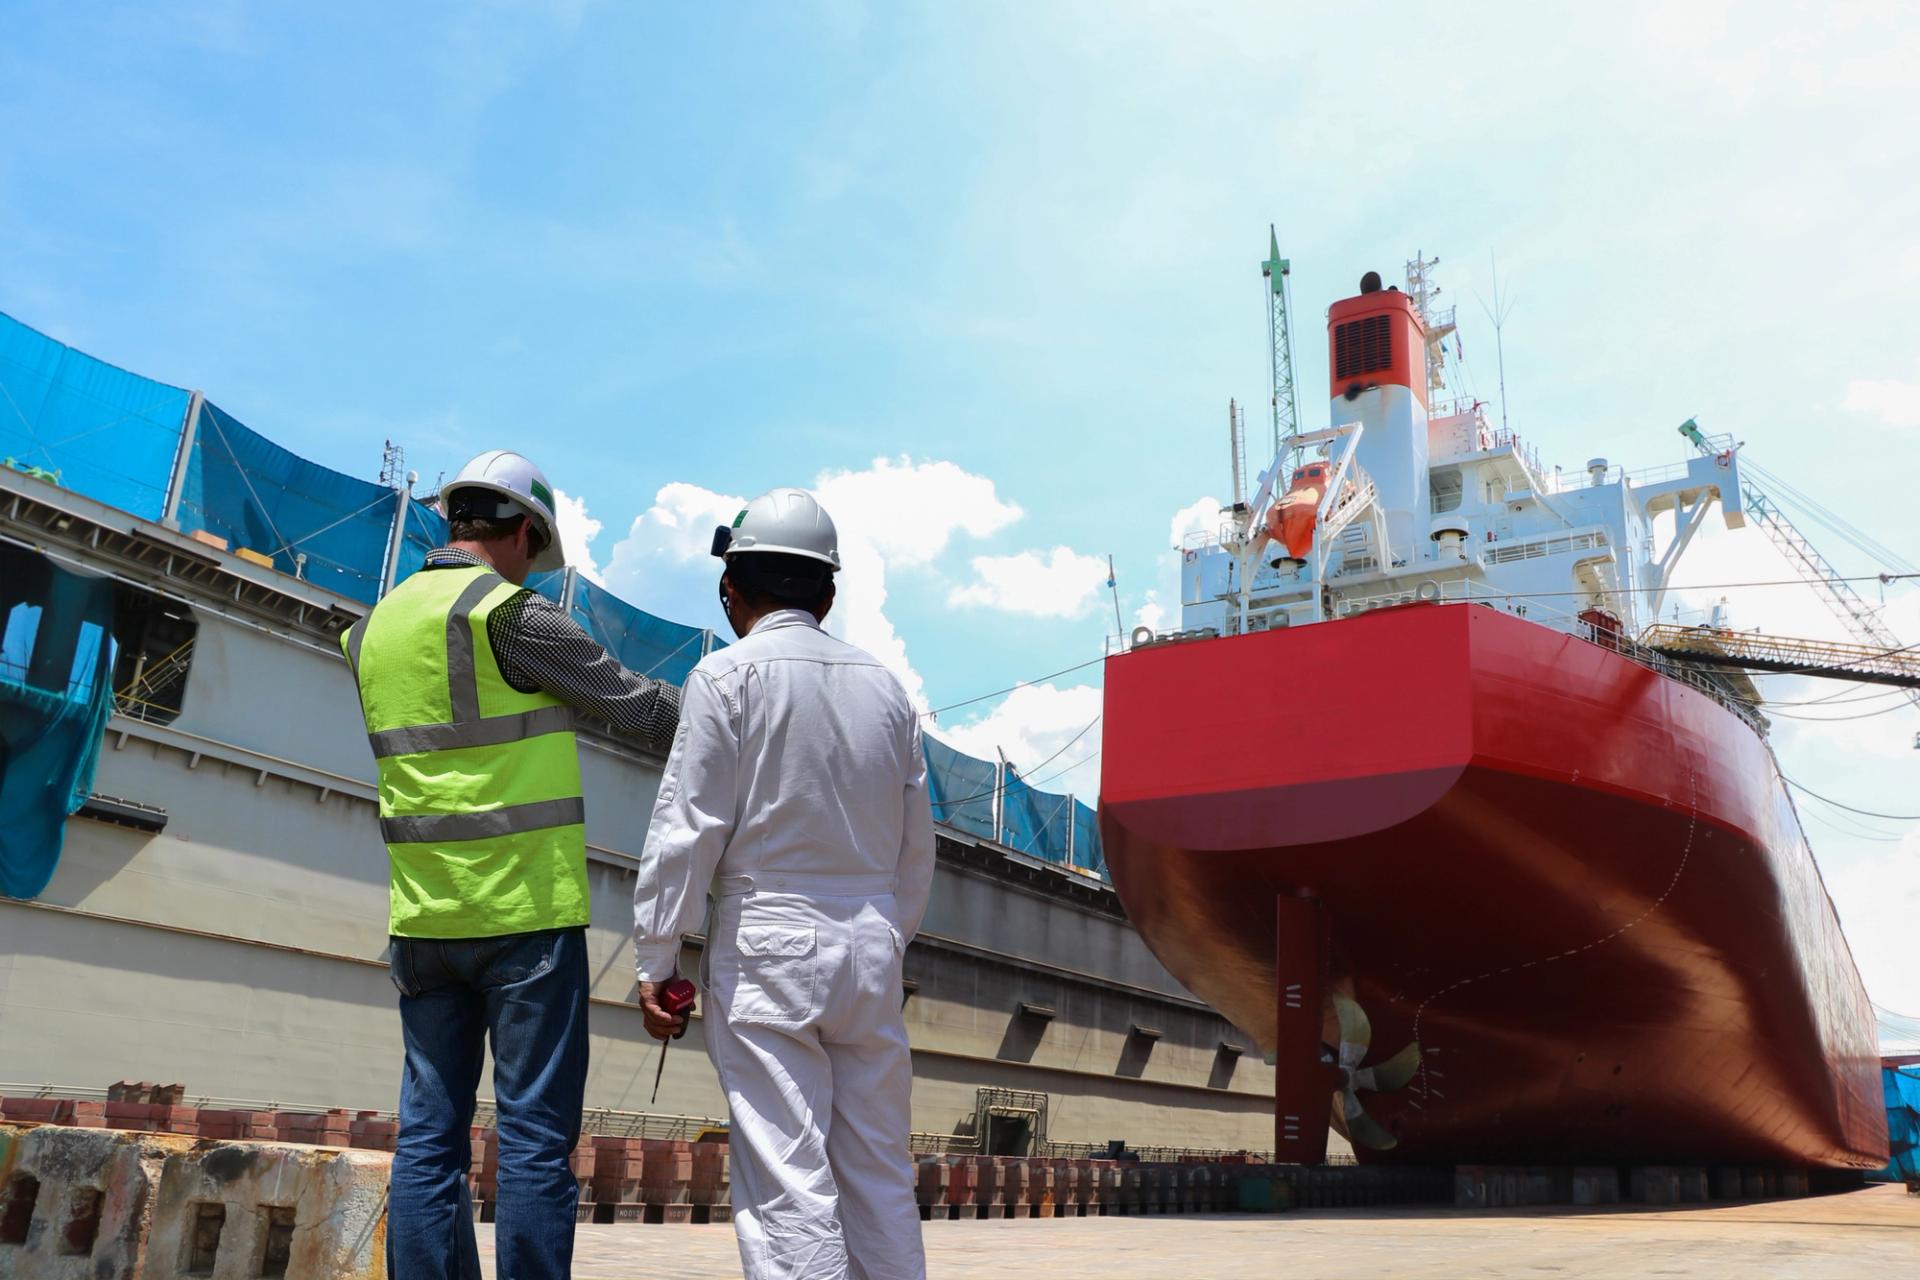 Two men in hard hats in front of a red ship